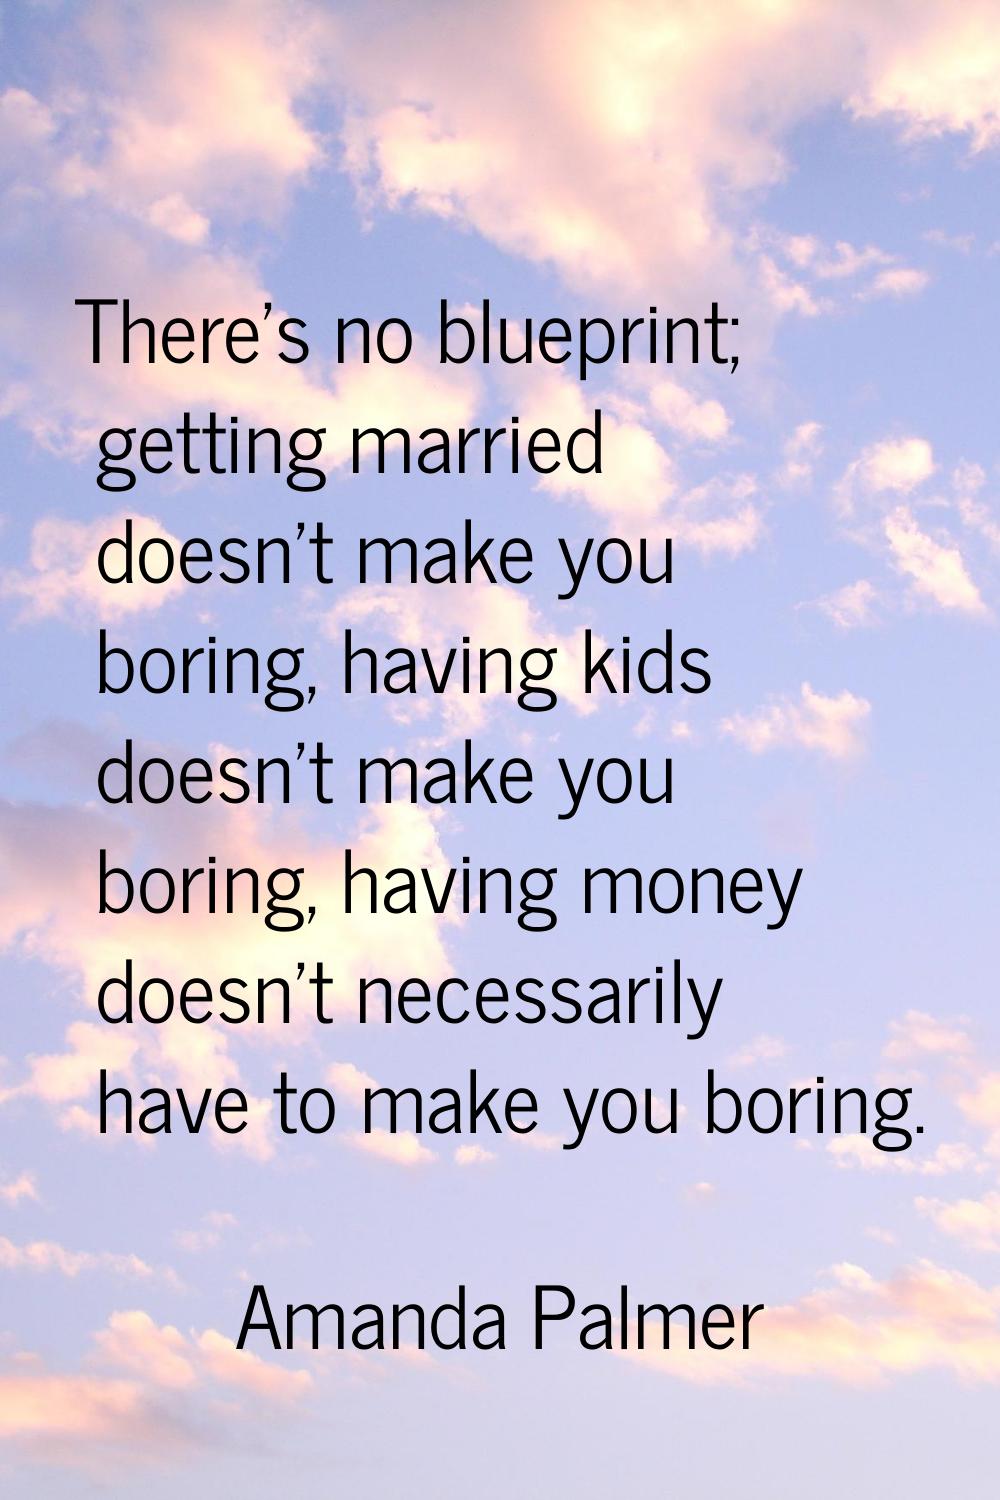 There's no blueprint; getting married doesn't make you boring, having kids doesn't make you boring,